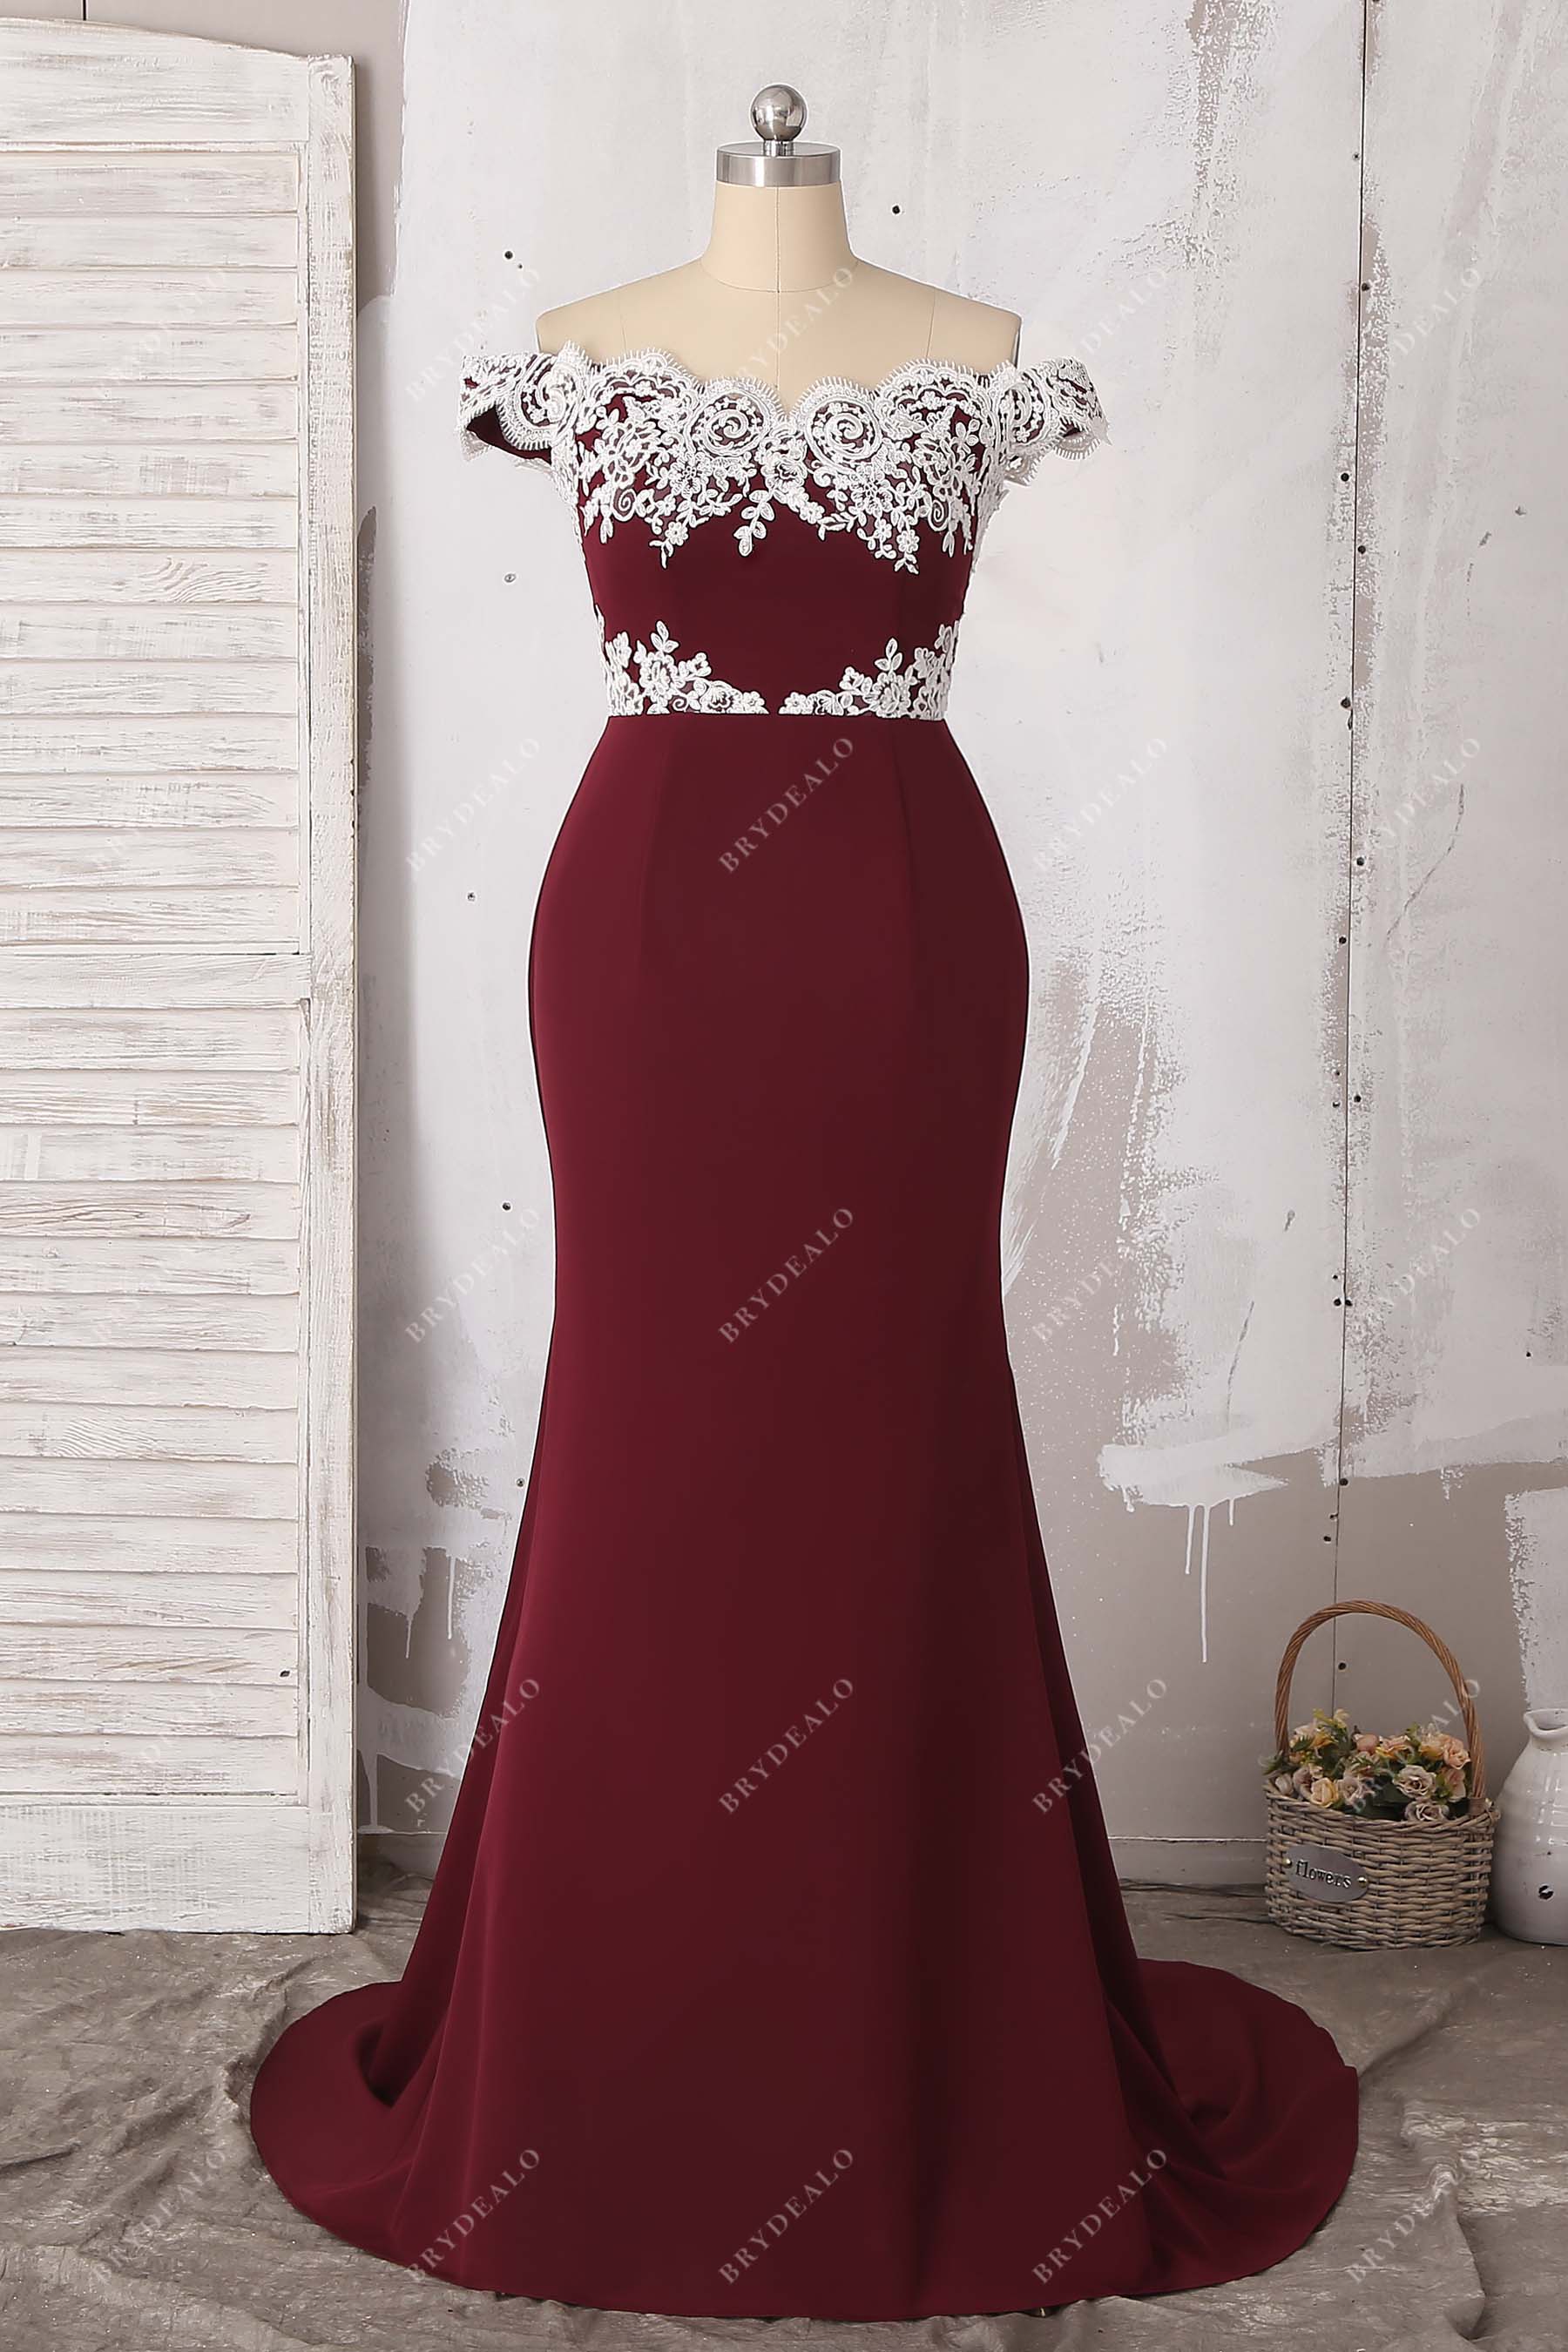 Red Bridesmaid Dresses: 22 Gorgeous Designs From Ruby to Rose 